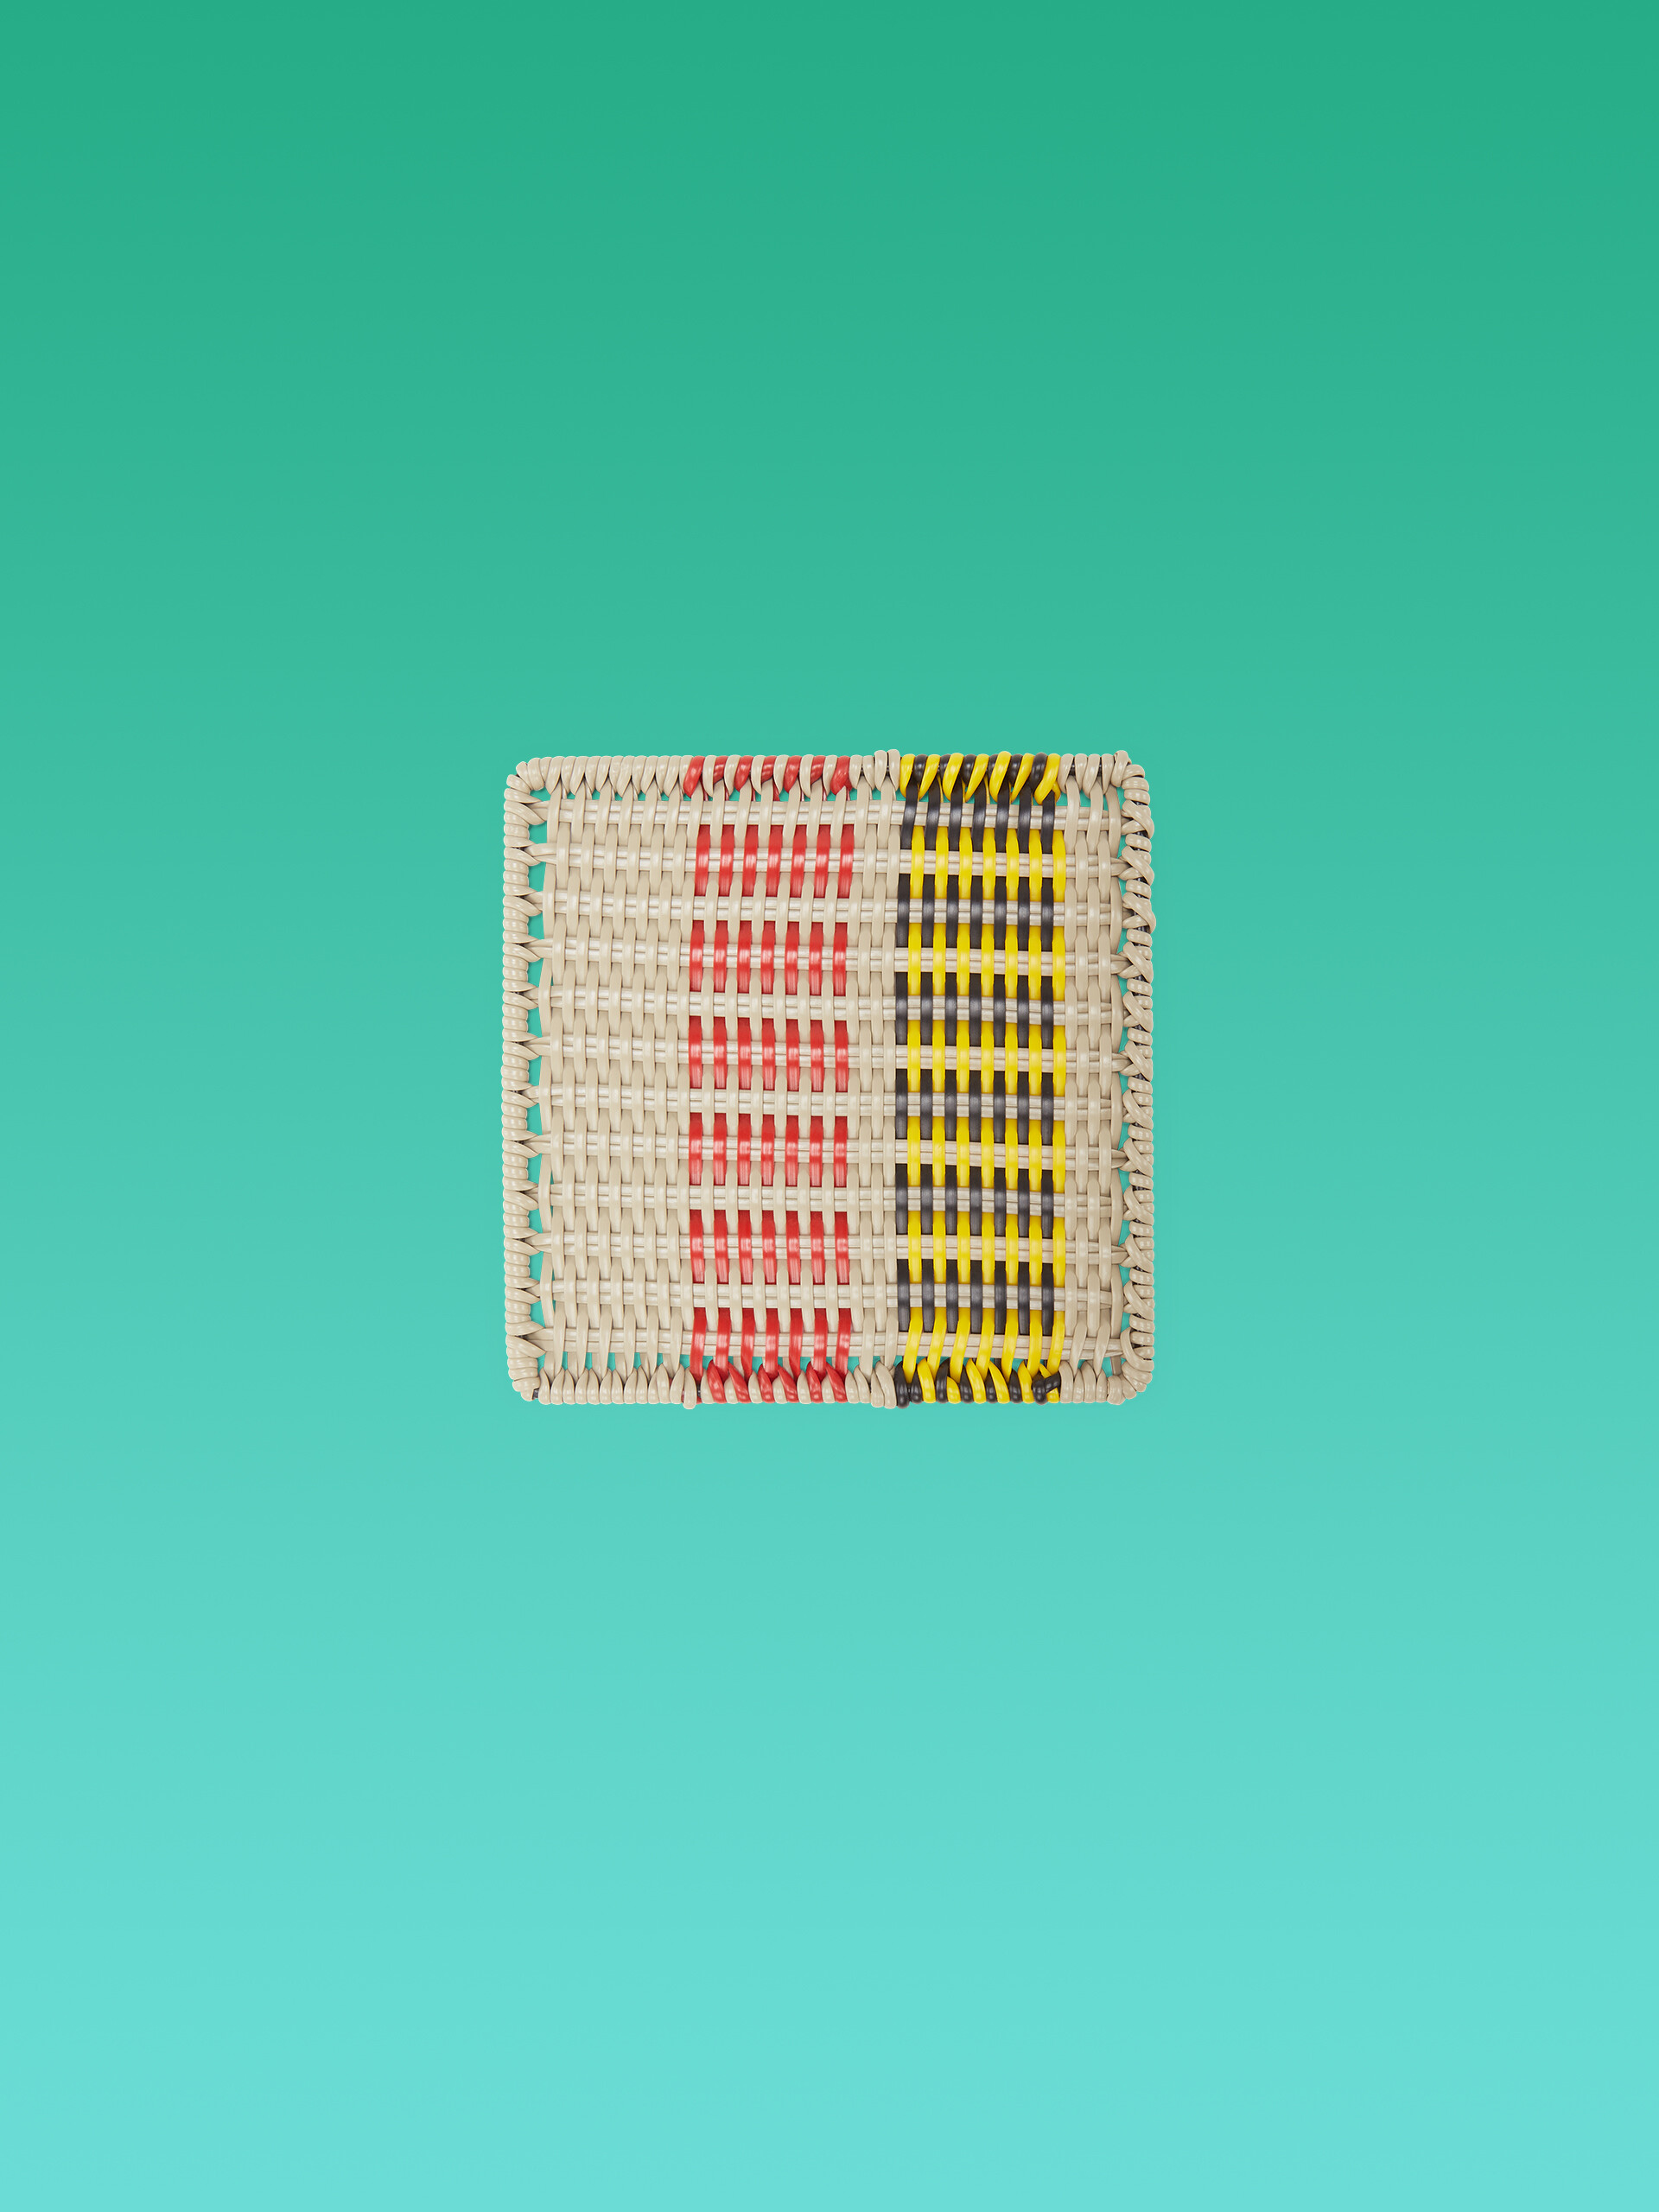 MARNI MARKET square mat with striped motif in iron and yellow, black, red and beige woven PVC - Accessories - Image 1